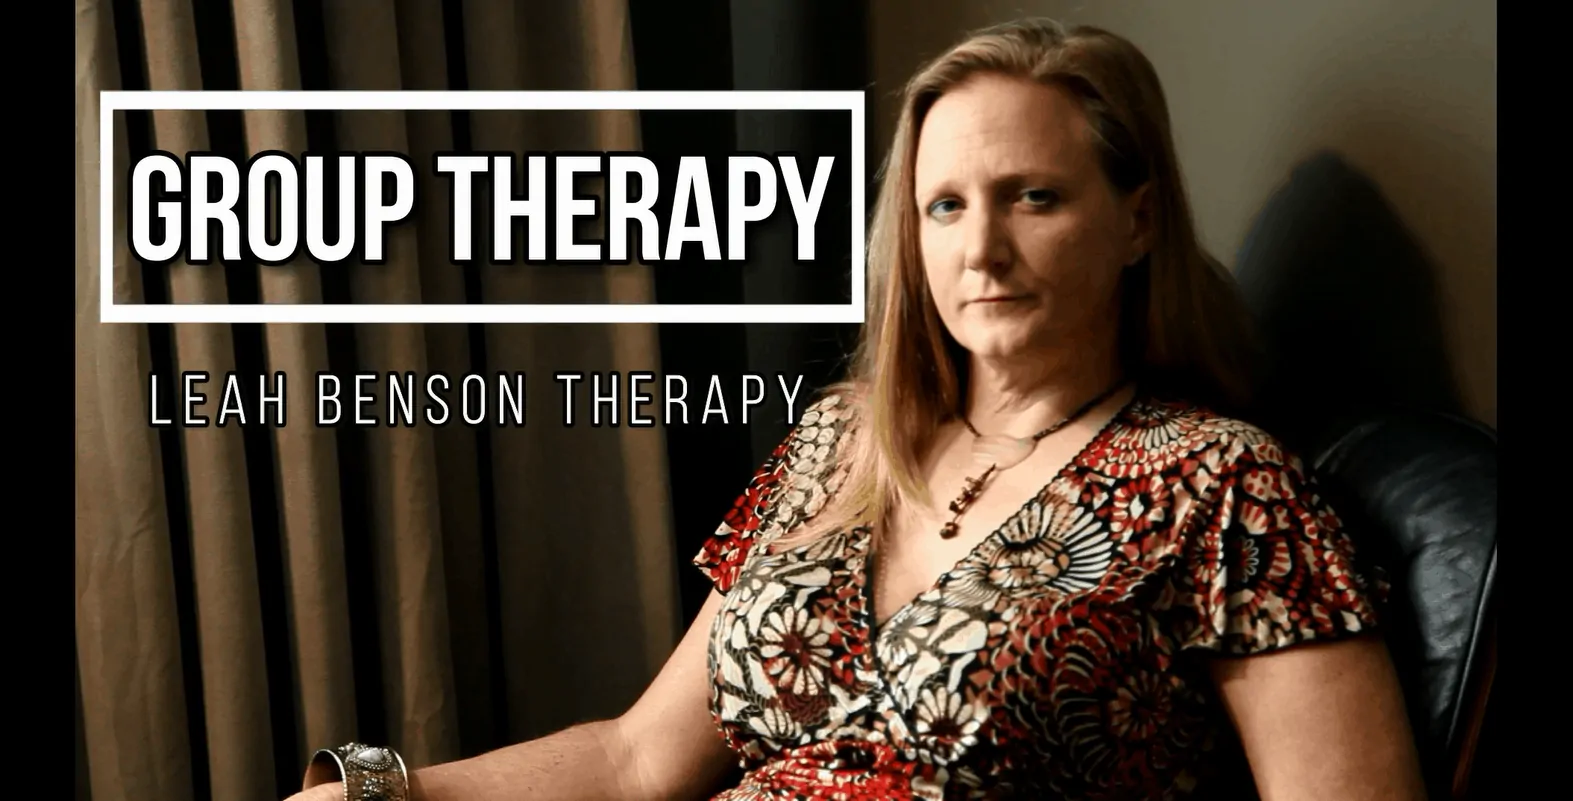 Group Therapy video and blog by Leah Benson Therapy